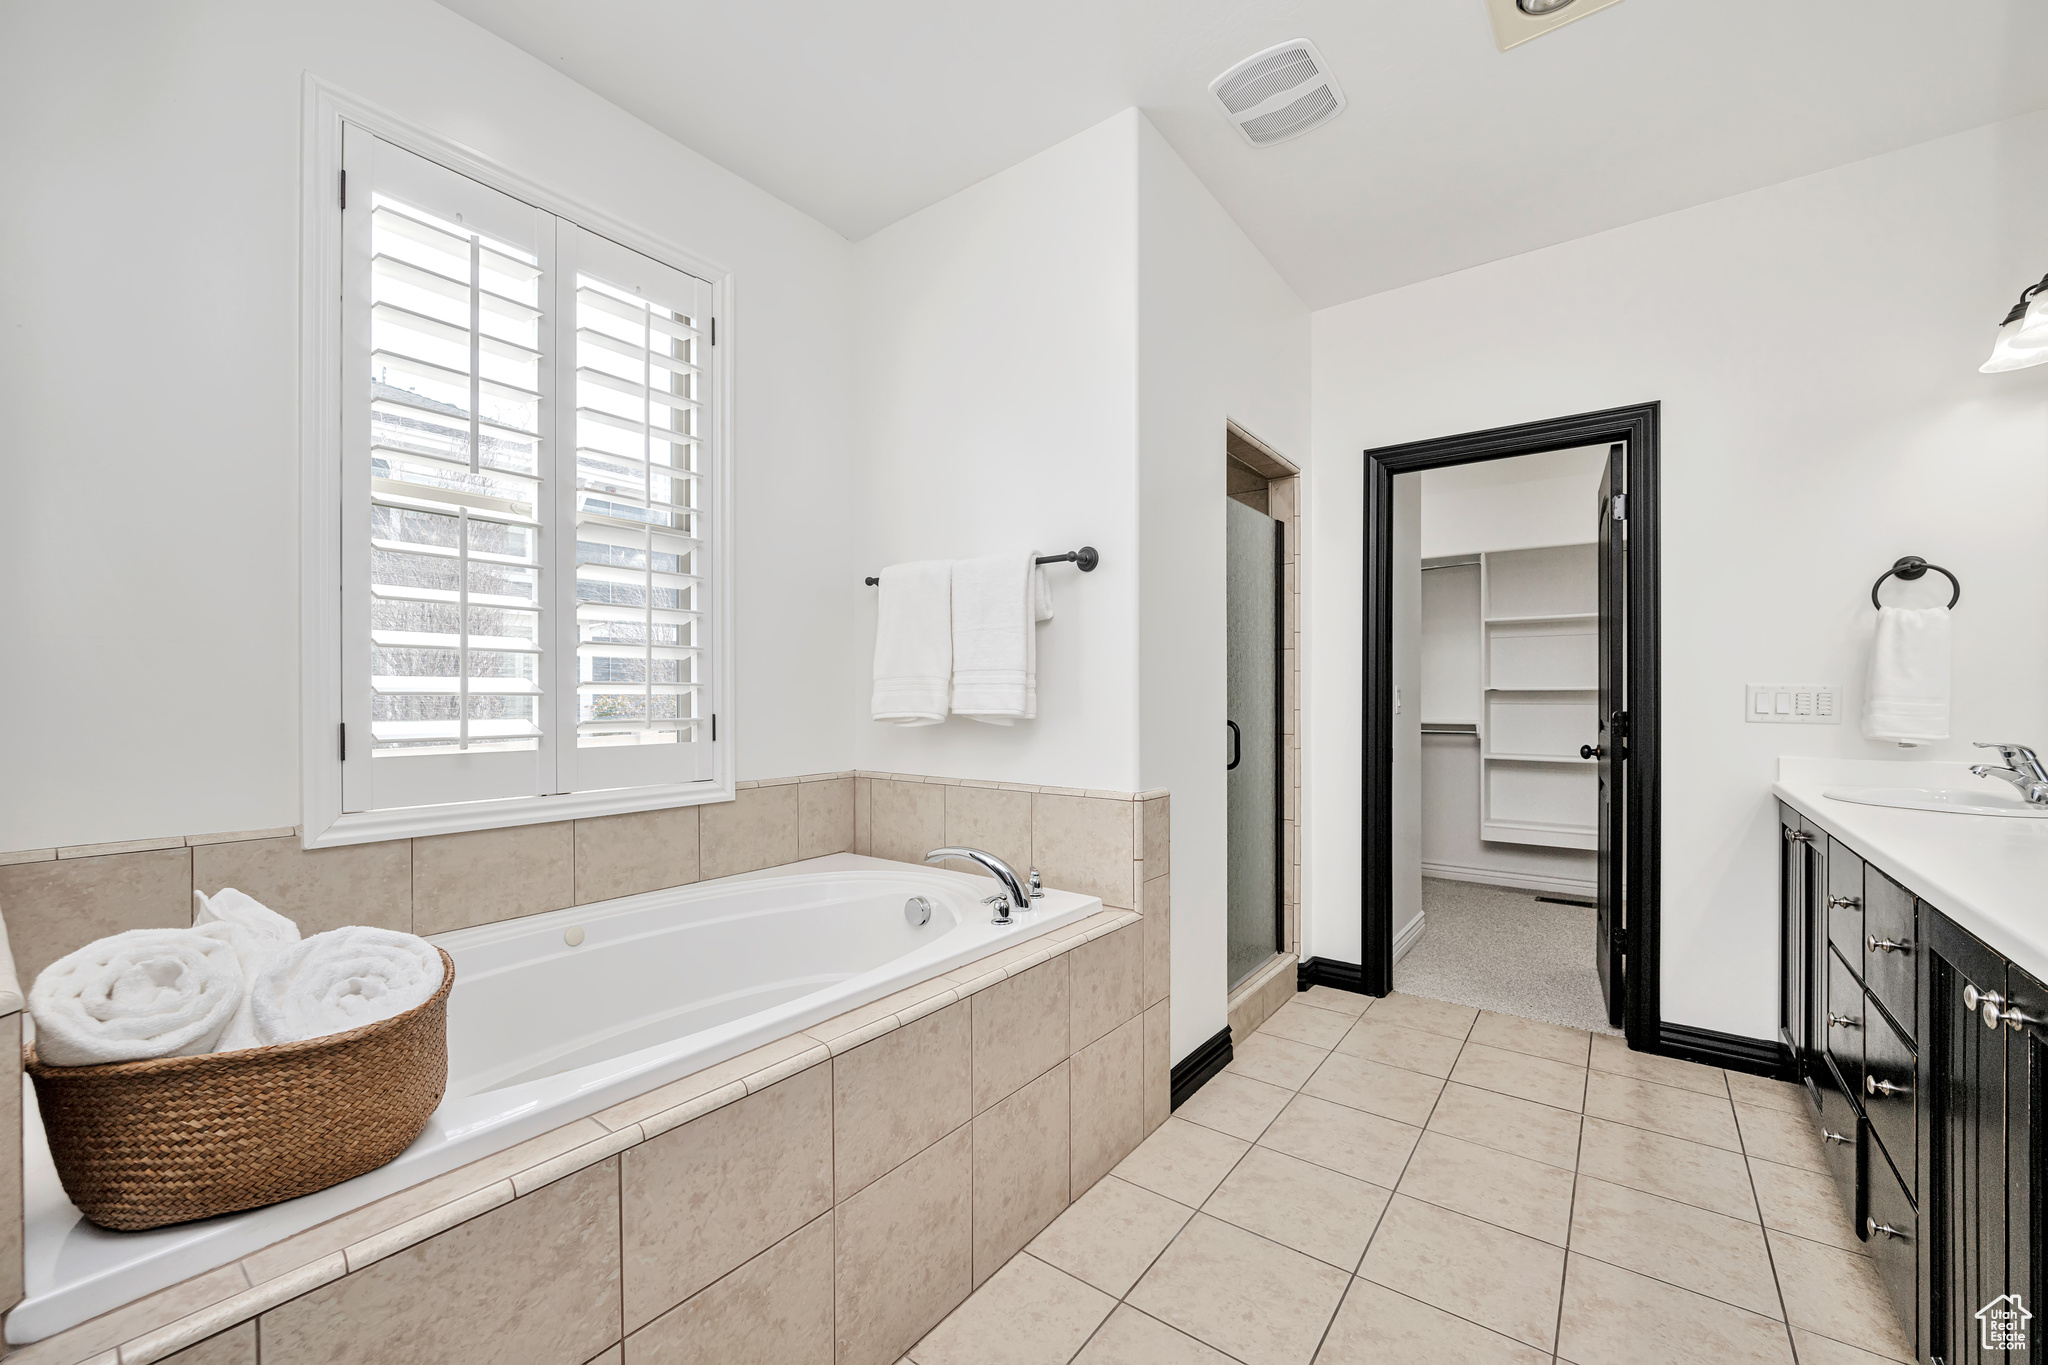 Bathroom 1 with tile floors, a wealth of natural light, vanity and jetted tub